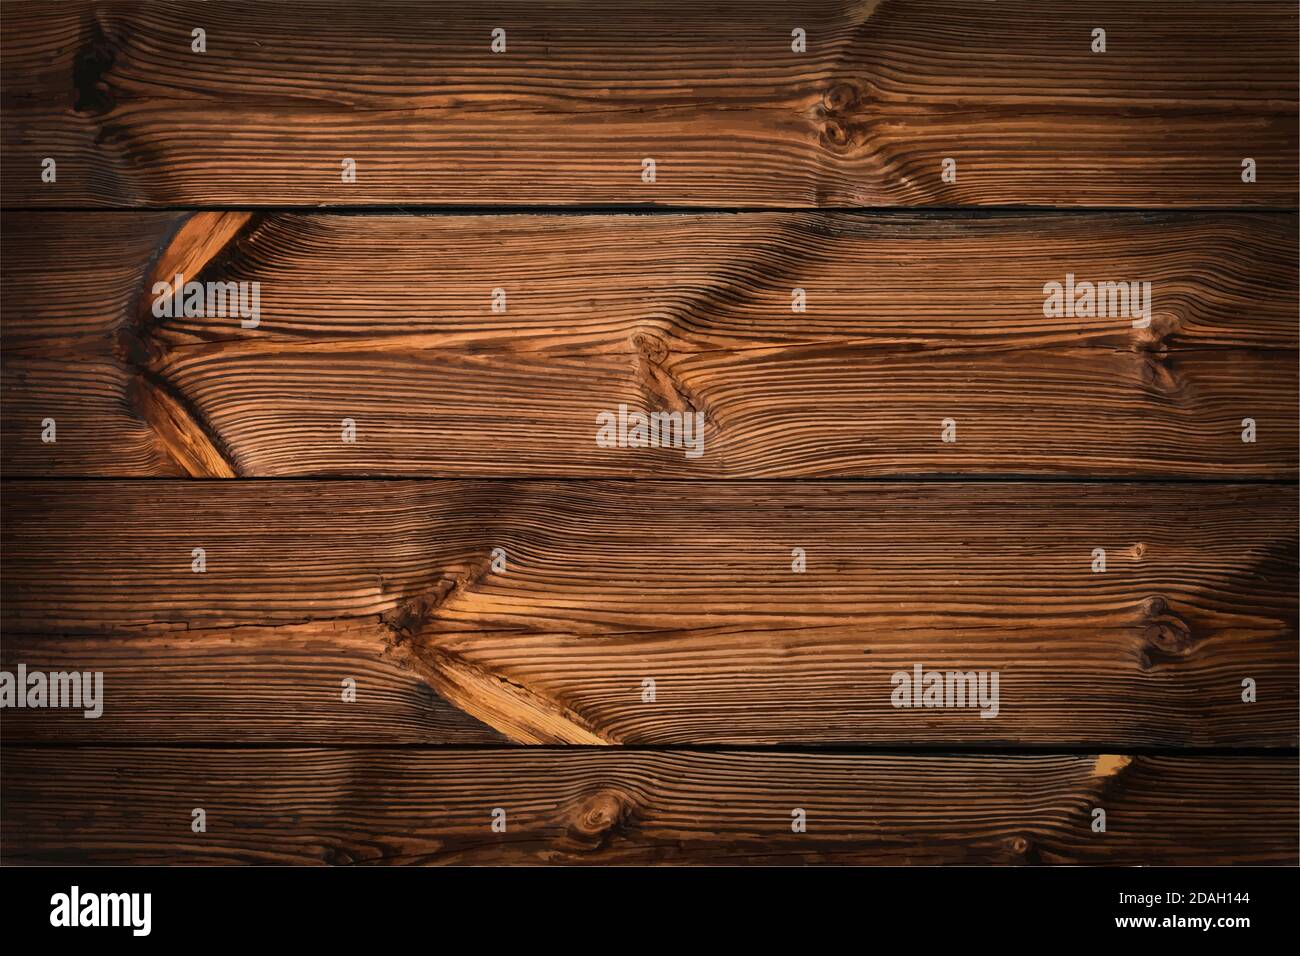 Vector illustration background texture of dark brown wide old vintage knotty wooden planks Stock Vector